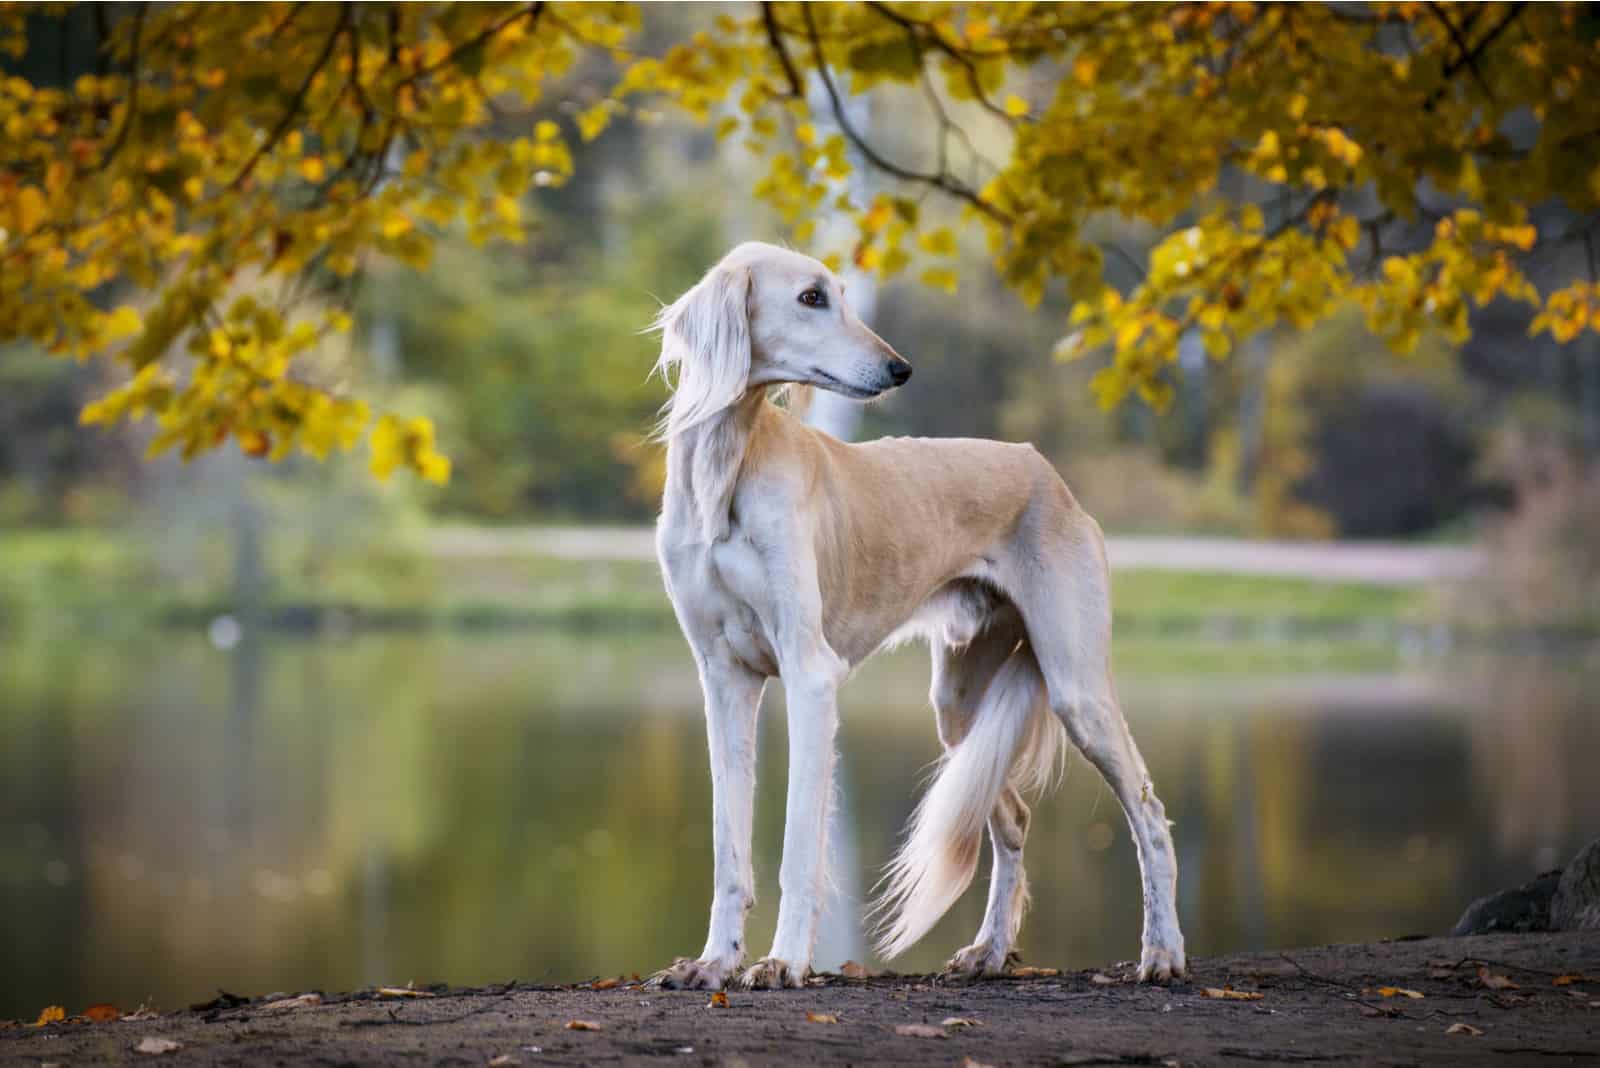 saluki or persian greyhound photographed in nature